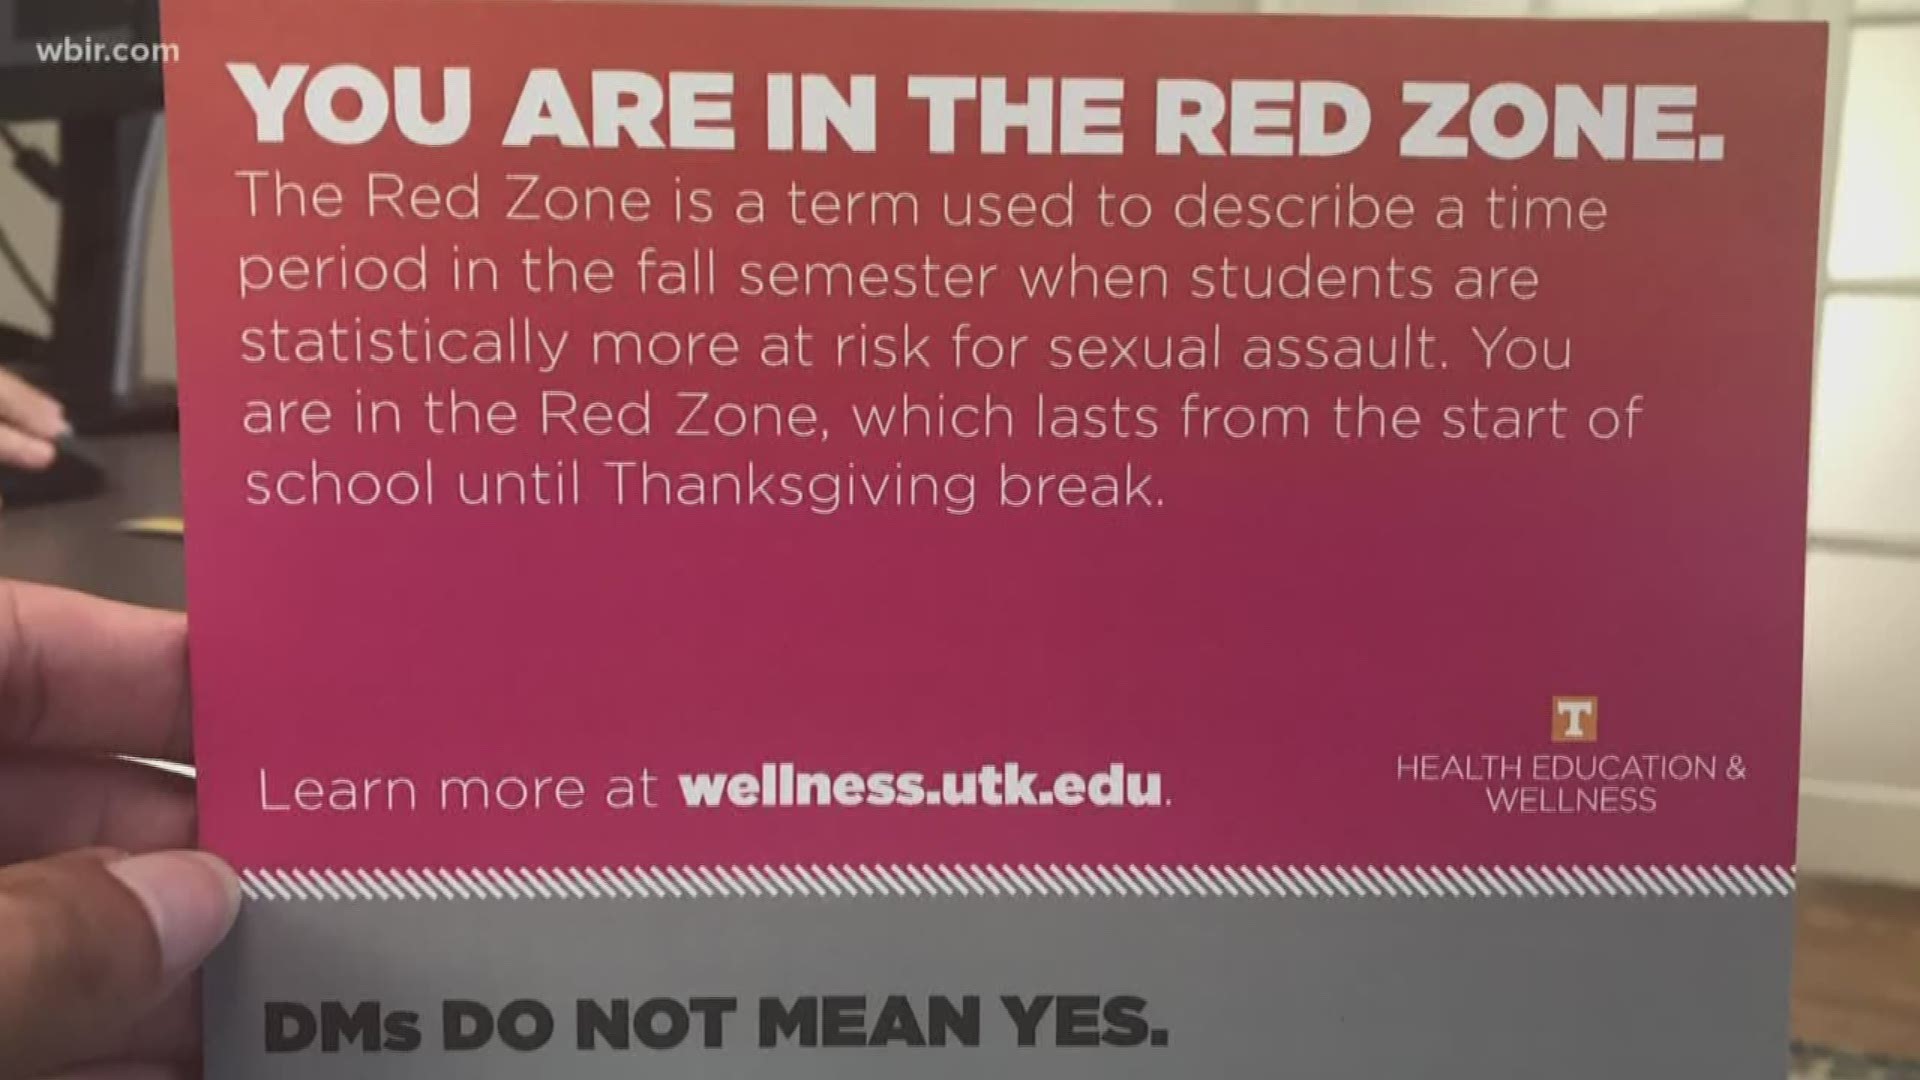 "The term Red Zone is used to describe the period of time when students are statistically most at risk of sexual assault, from the beginning of the semester until Thanksgiving break."